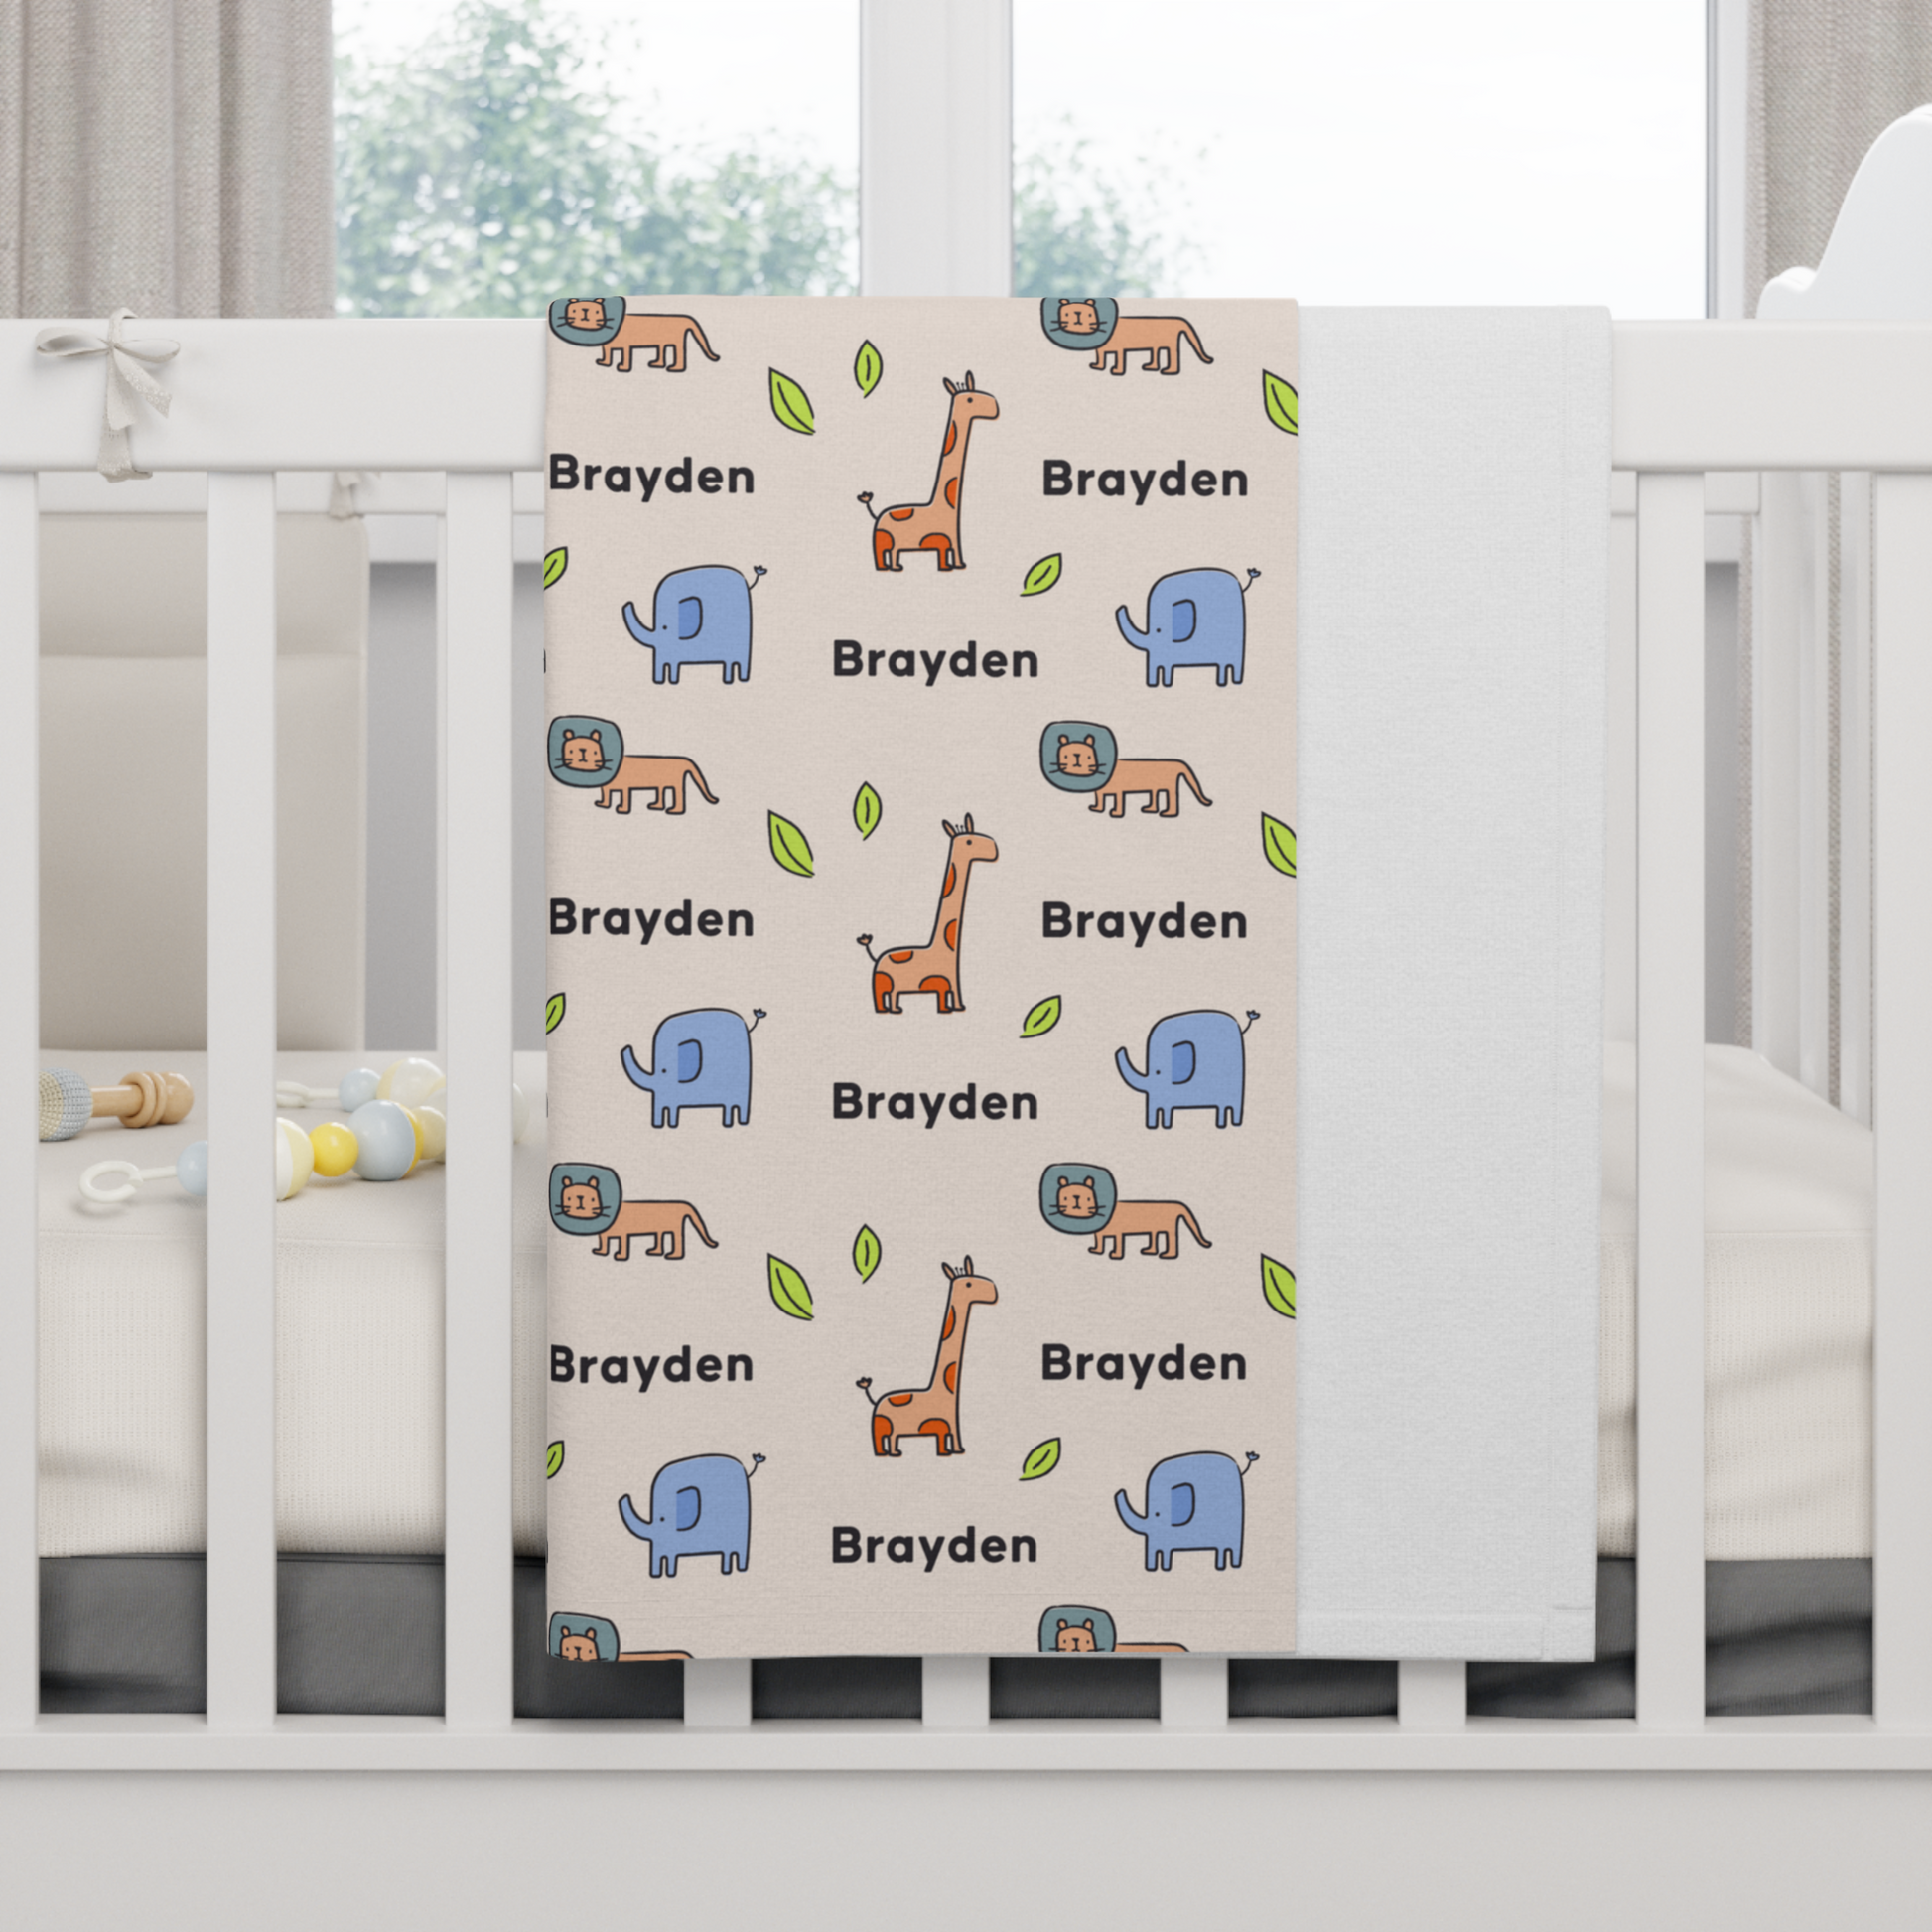 Fleece personalized baby blanket in safari animal pattern hung over side of white crib with window in the background